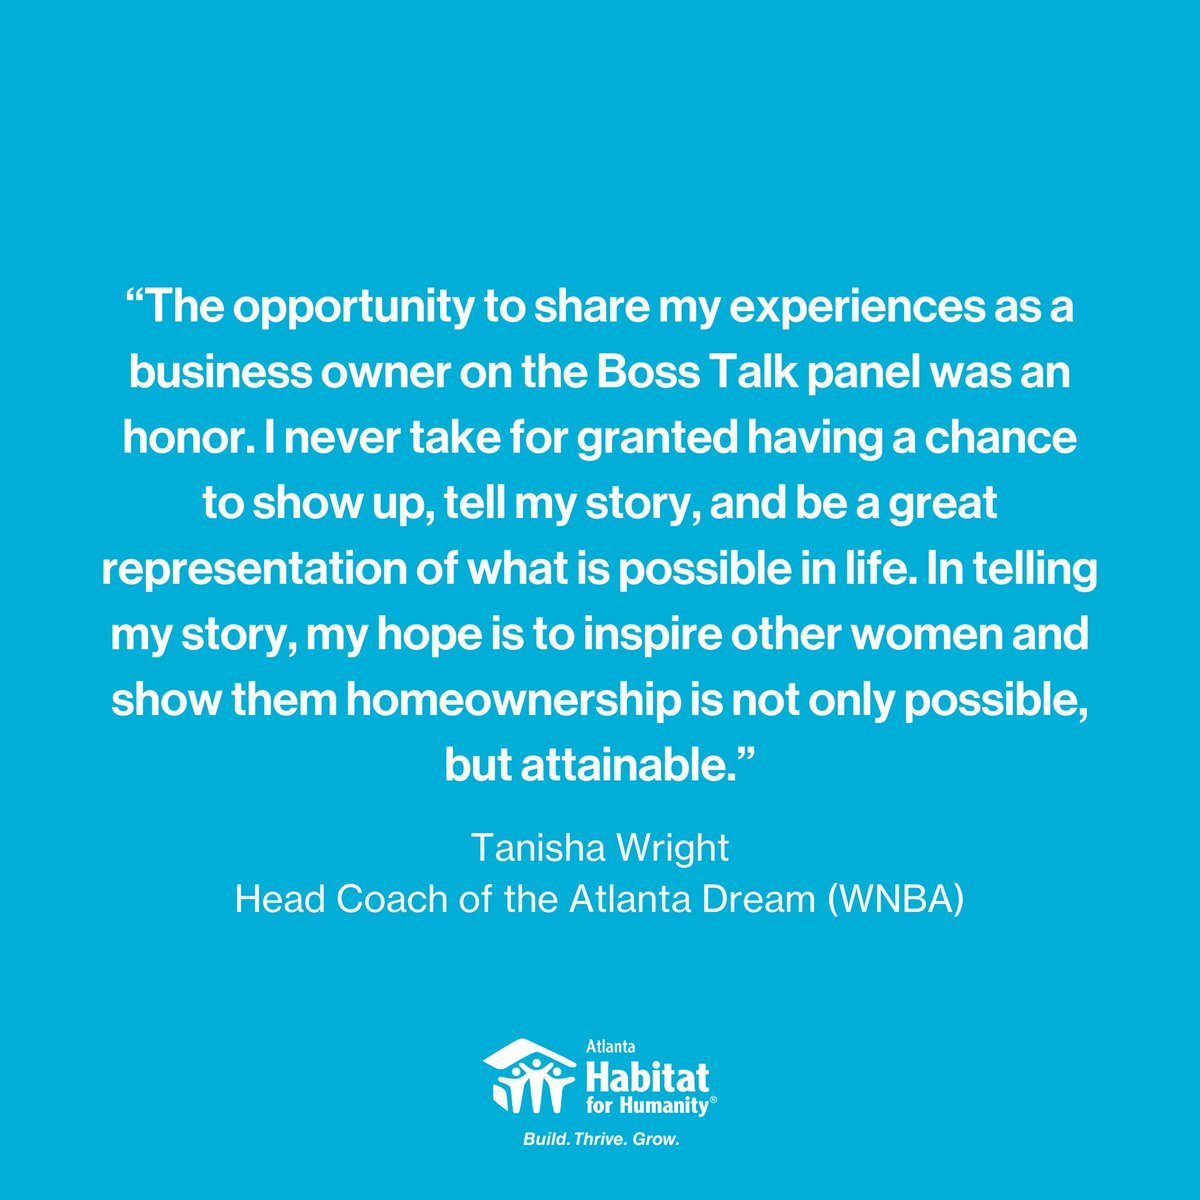 Tanisha Wright, real estate investor and head coach of the @AtlantaDream, inspired Atlanta Habitat homeowners as part of our Boss Talk leadership speaker series earlier this month. #BuiltToThrive